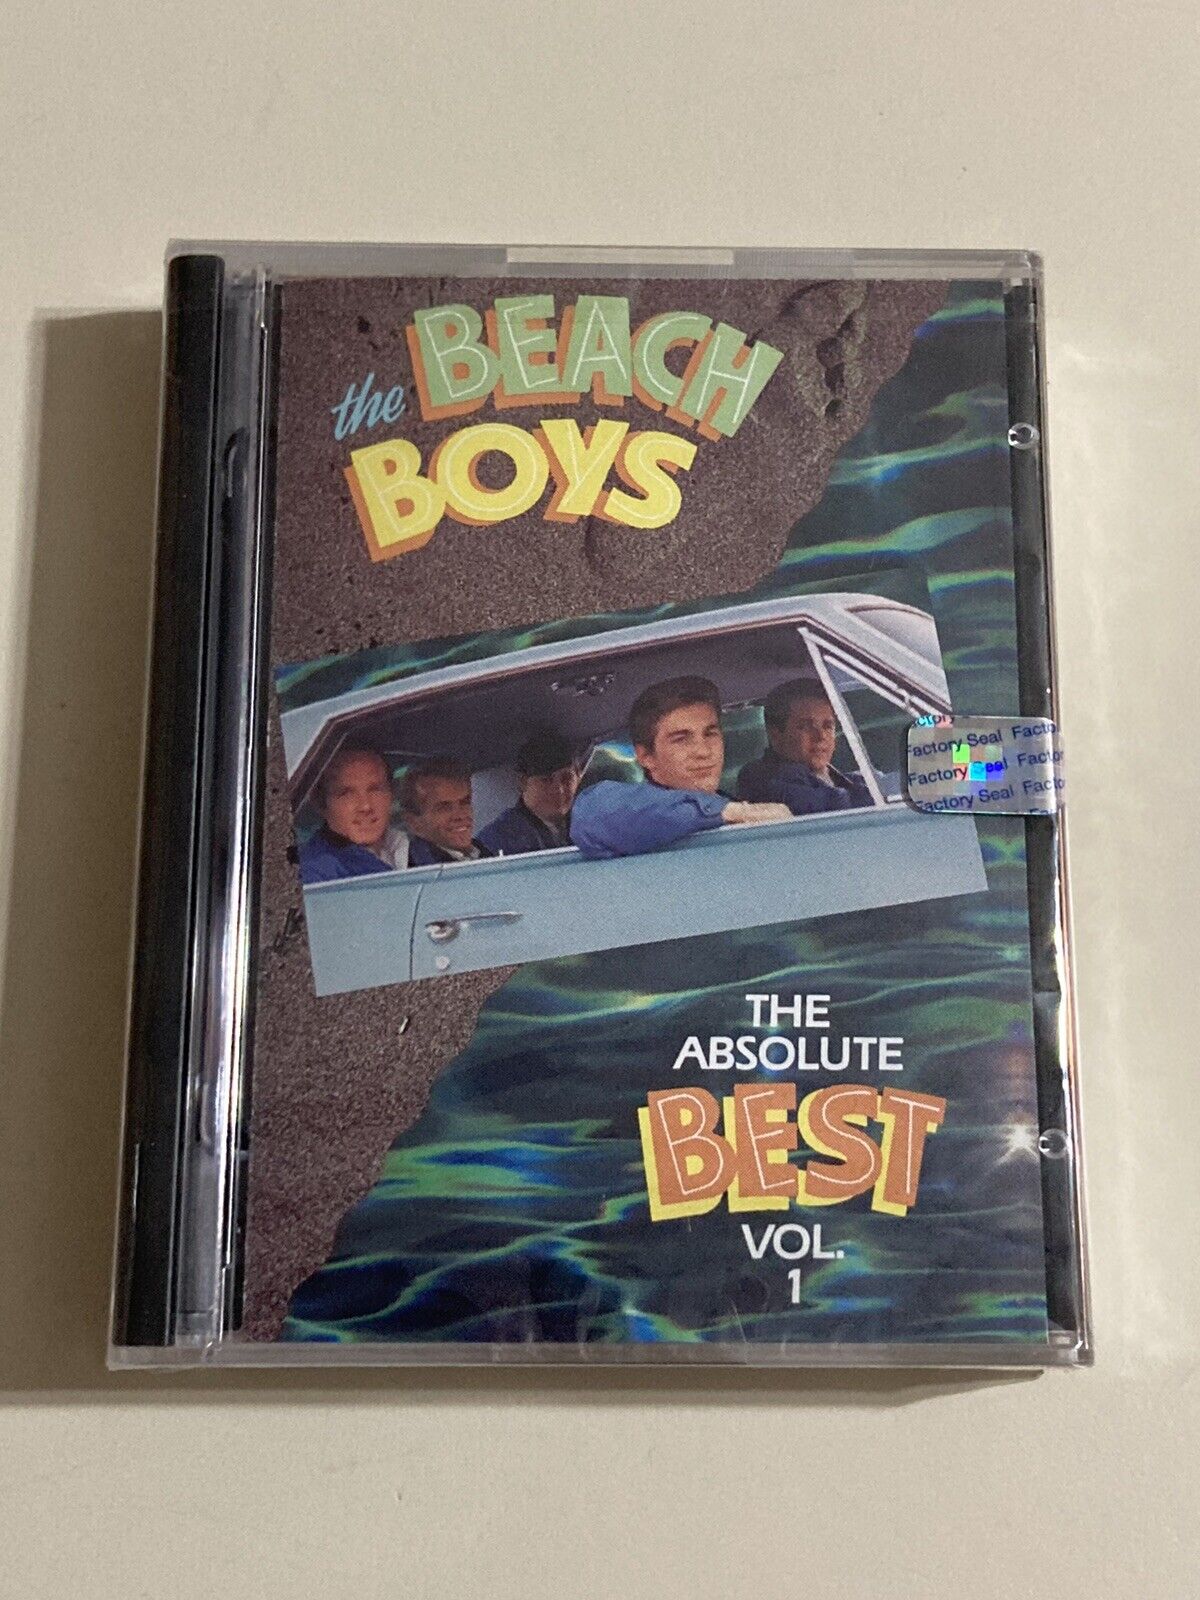 Rare SEALED BRAND NEW MiniDisc by THE BEACH BOYS “The Absolute Best Vol. 1” Mini